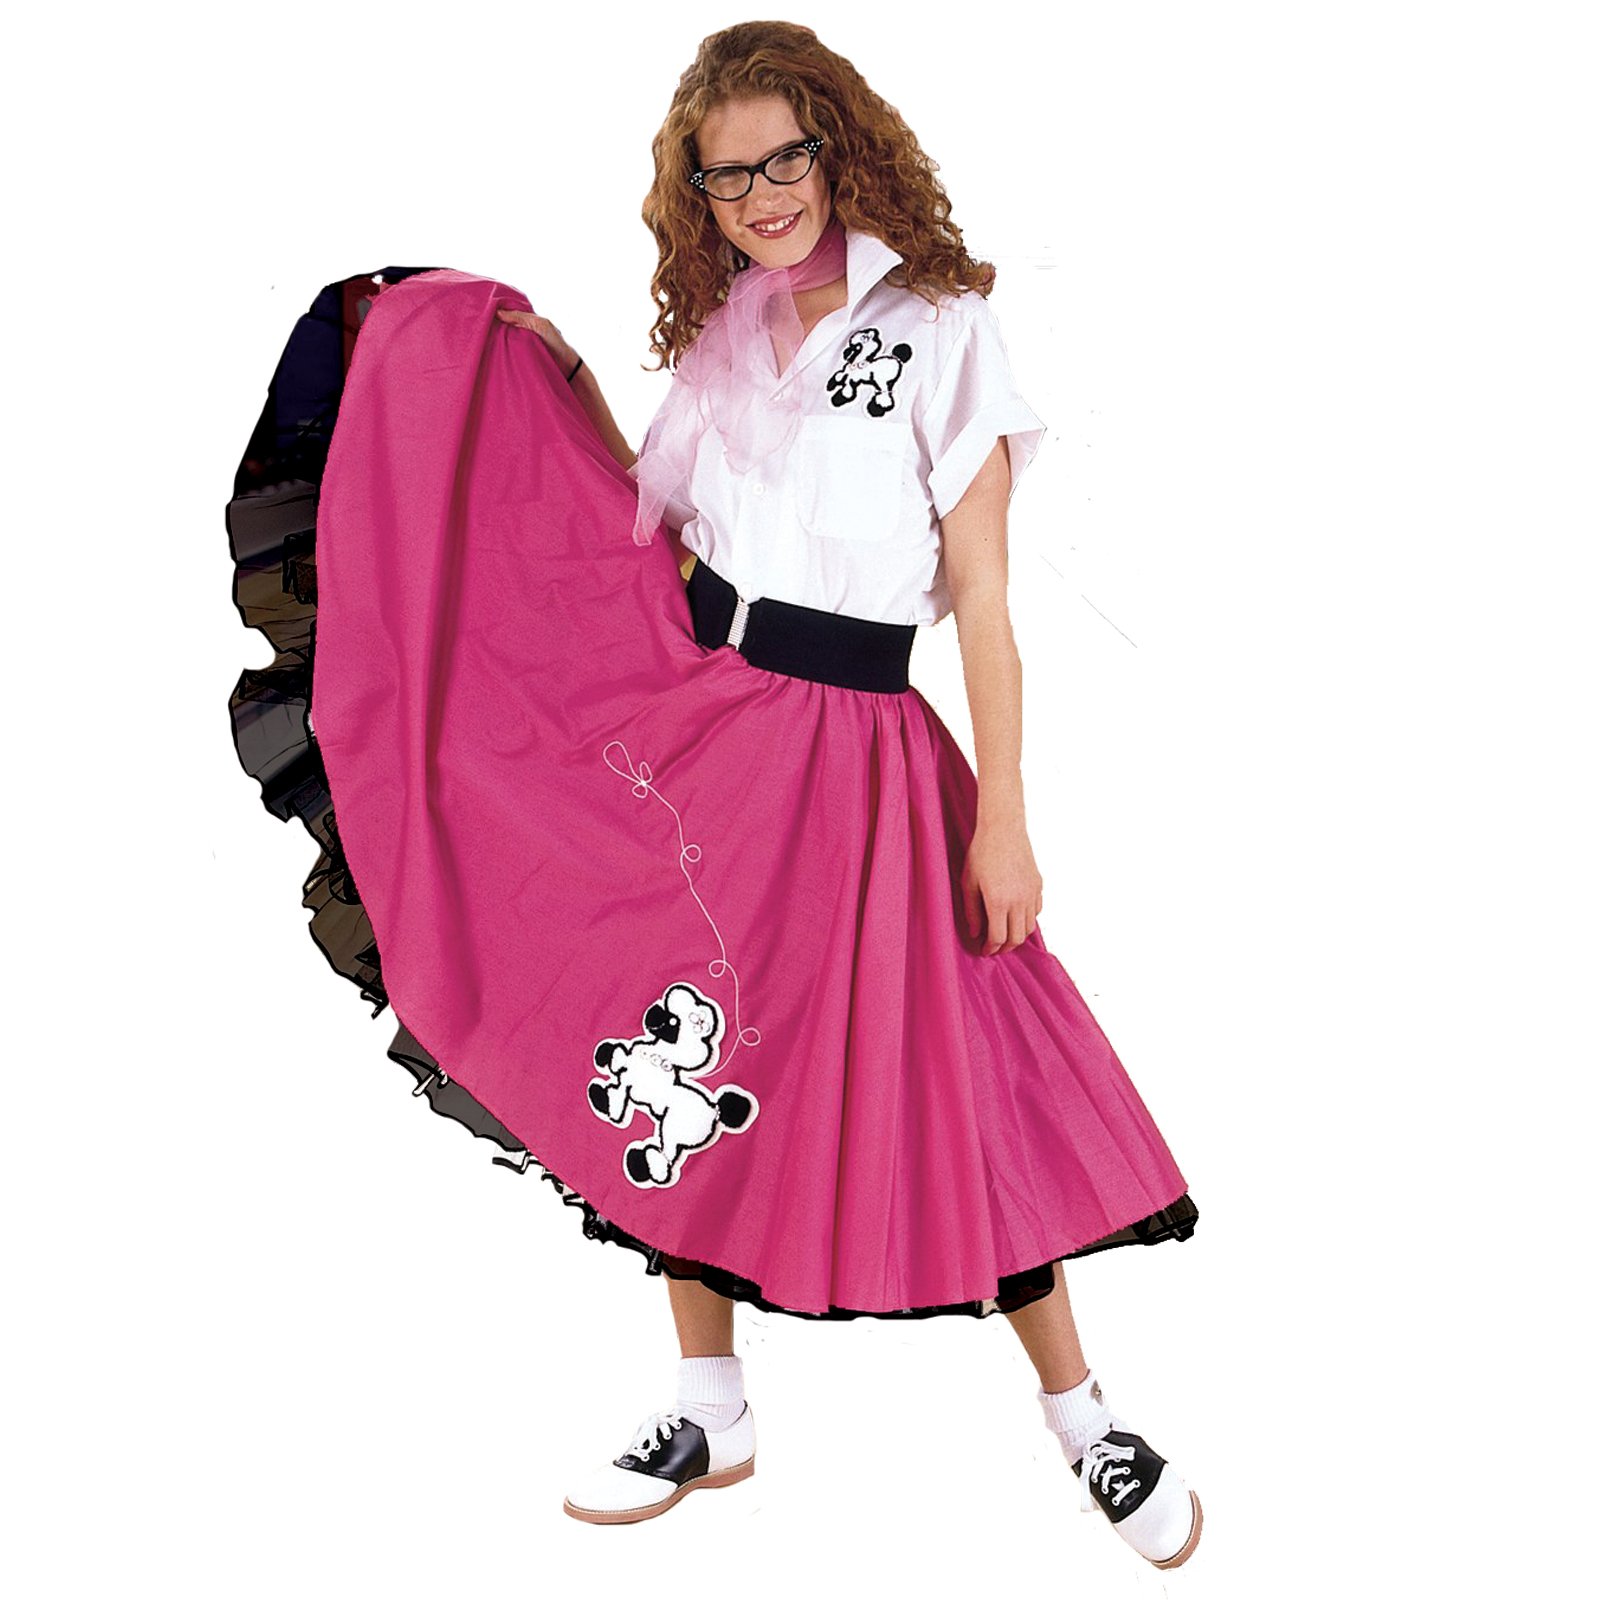 Complete Poodle Skirt Outfit Plus (Pink & White) Adult Costume